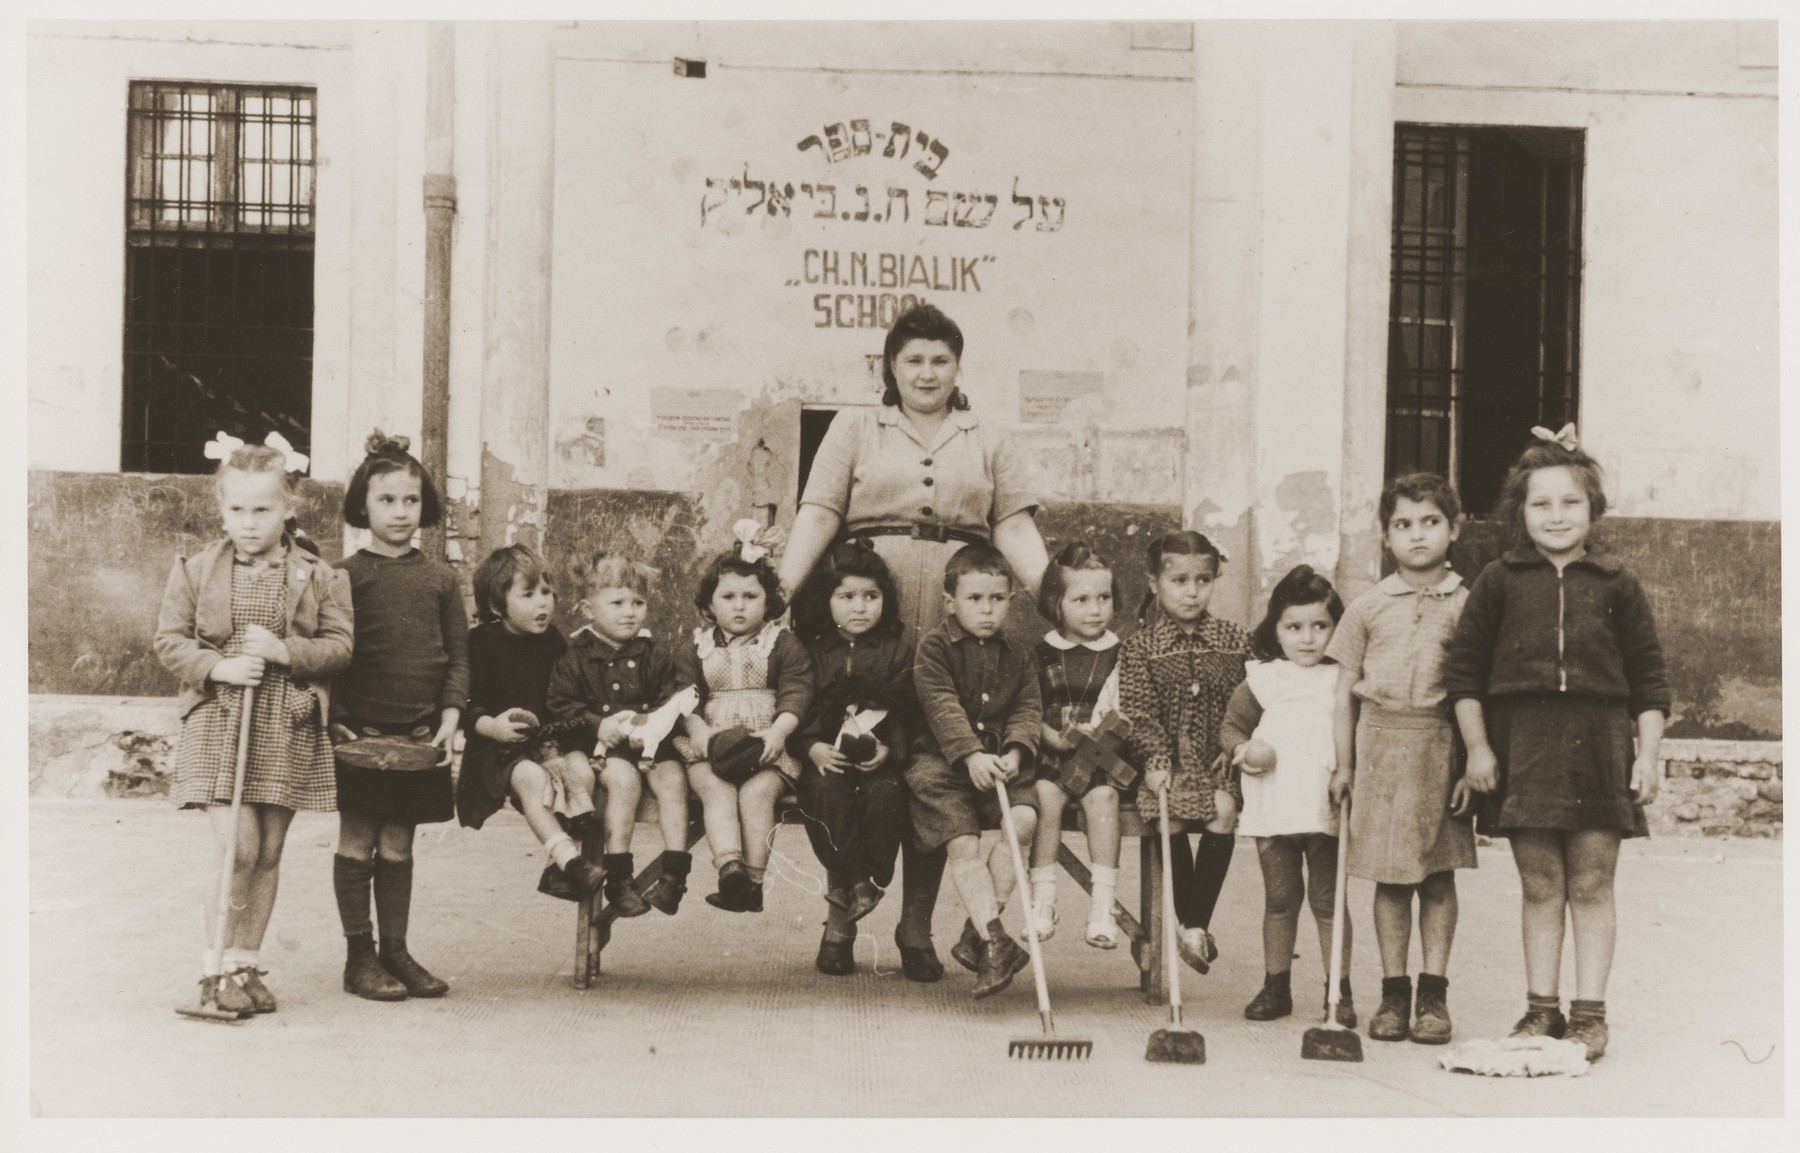 Jewish DP children at the Cremona displaced persons camp pose outside the Chaim Nachman Bialik school holding rakes and hoes.

Among those pictured is Masha Leikach (far left).